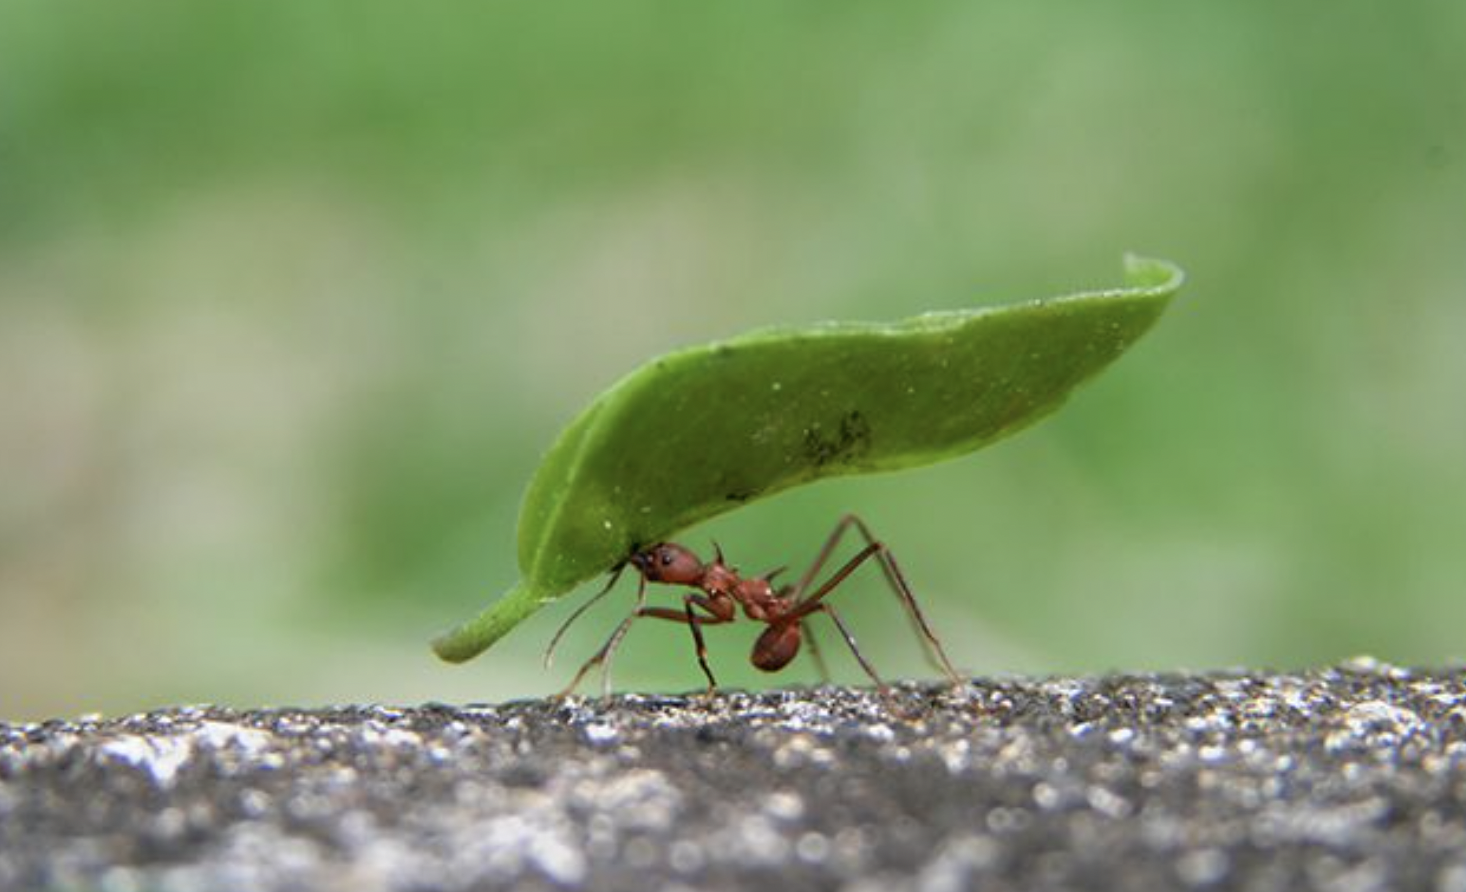 “Ants will refuse ‘medical’ help from their colony if they know they are mortally wounded. Rather than waste the colony’s resources and energy on futile rehabilitation, the wounded ant flails its legs forcing help to abandon them.”